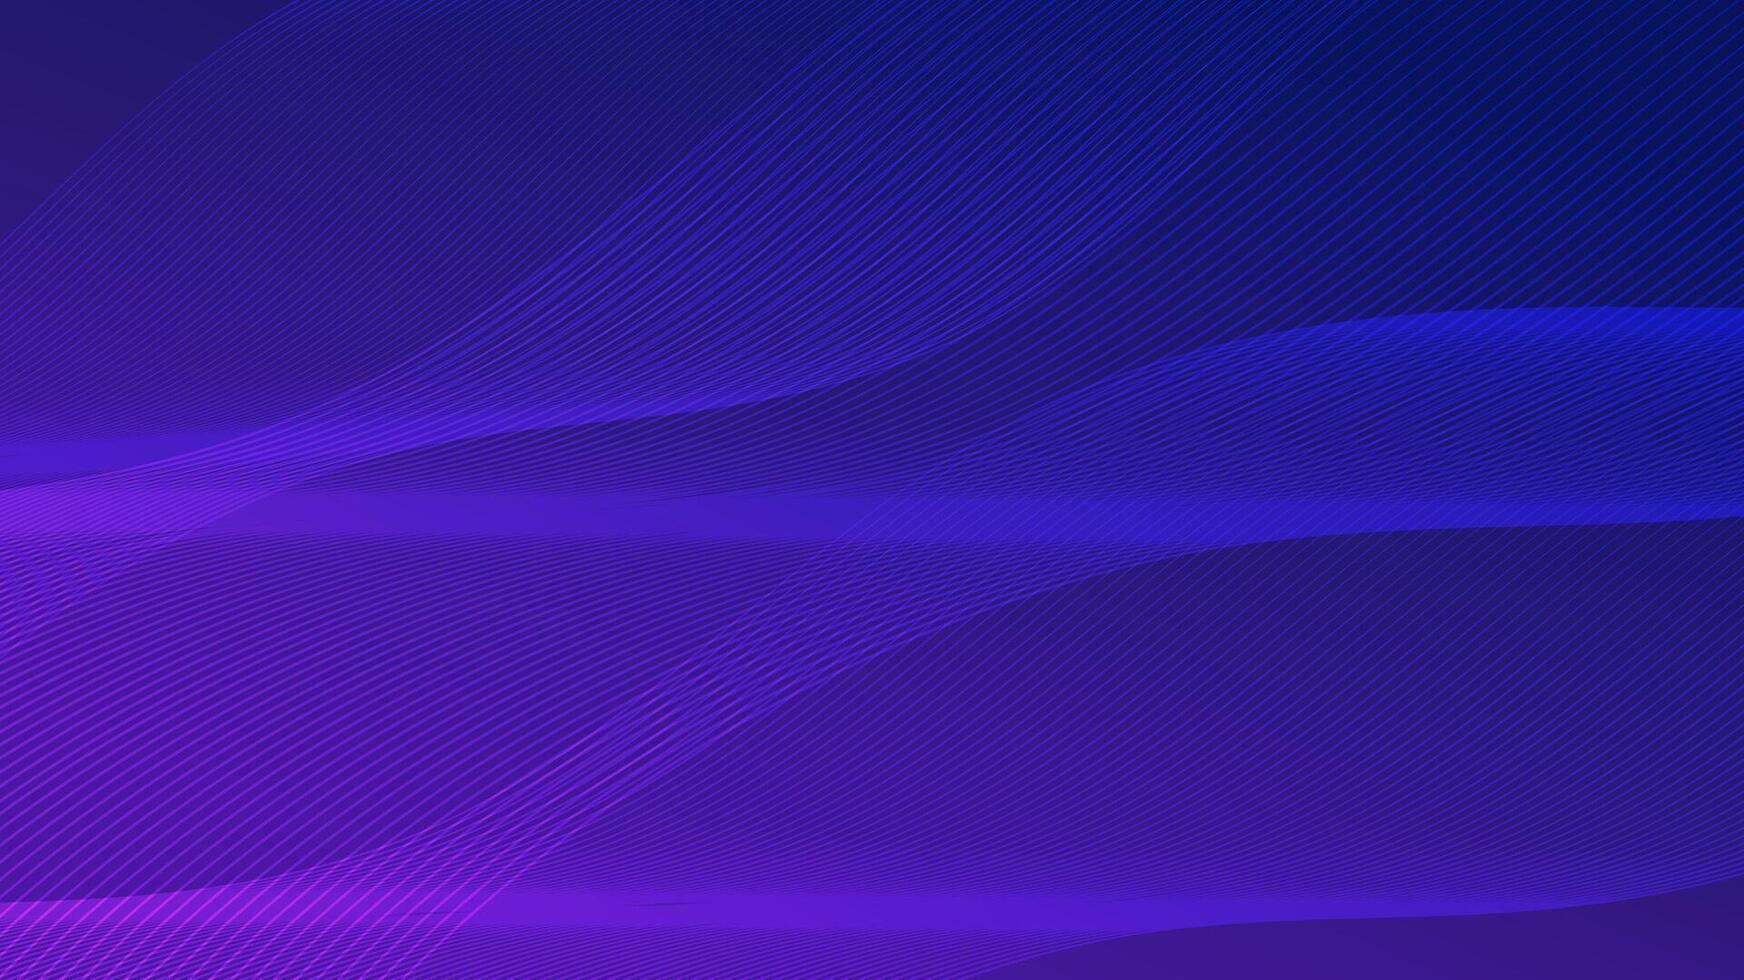 abstract background with flowing waves in dark blue and purple colours. digital futuristic background concept. vector